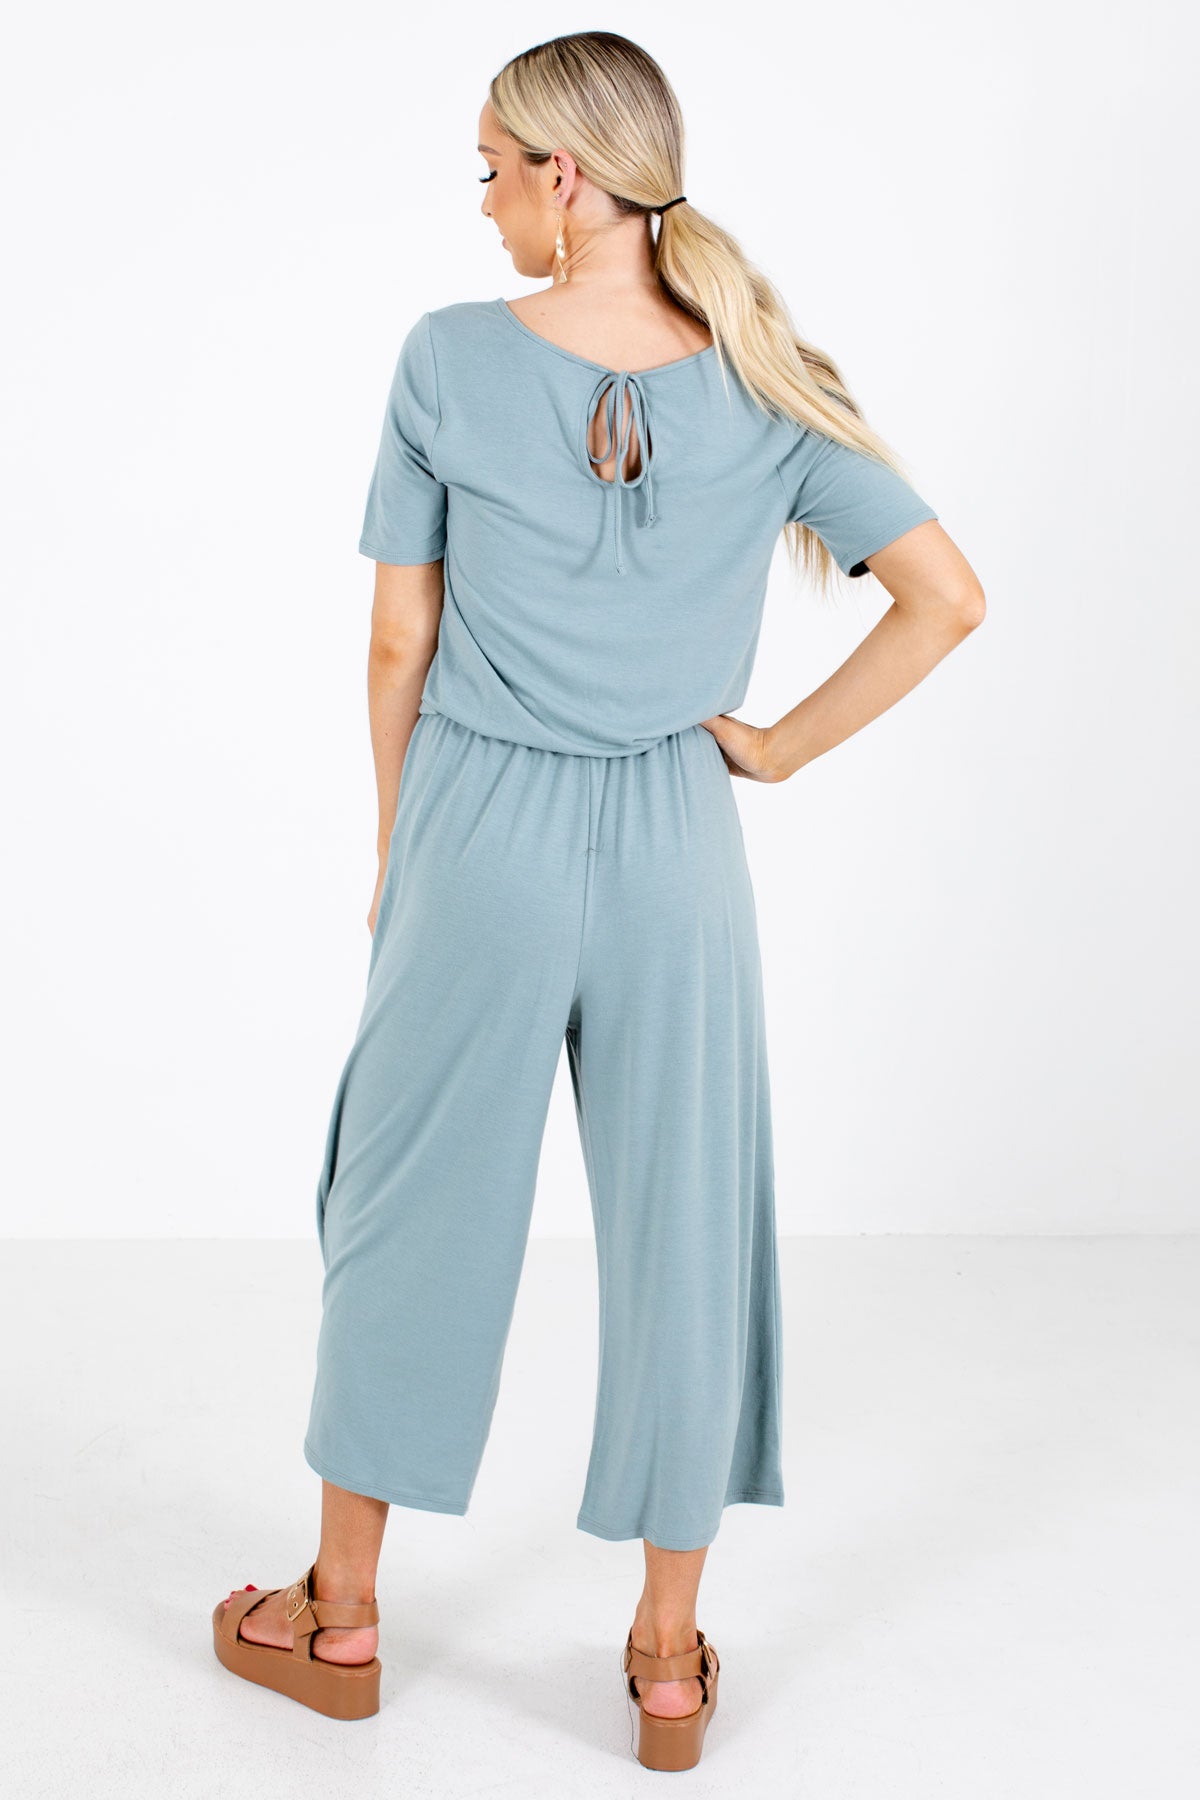 Women's Green Boutique Jumpsuit with Pockets